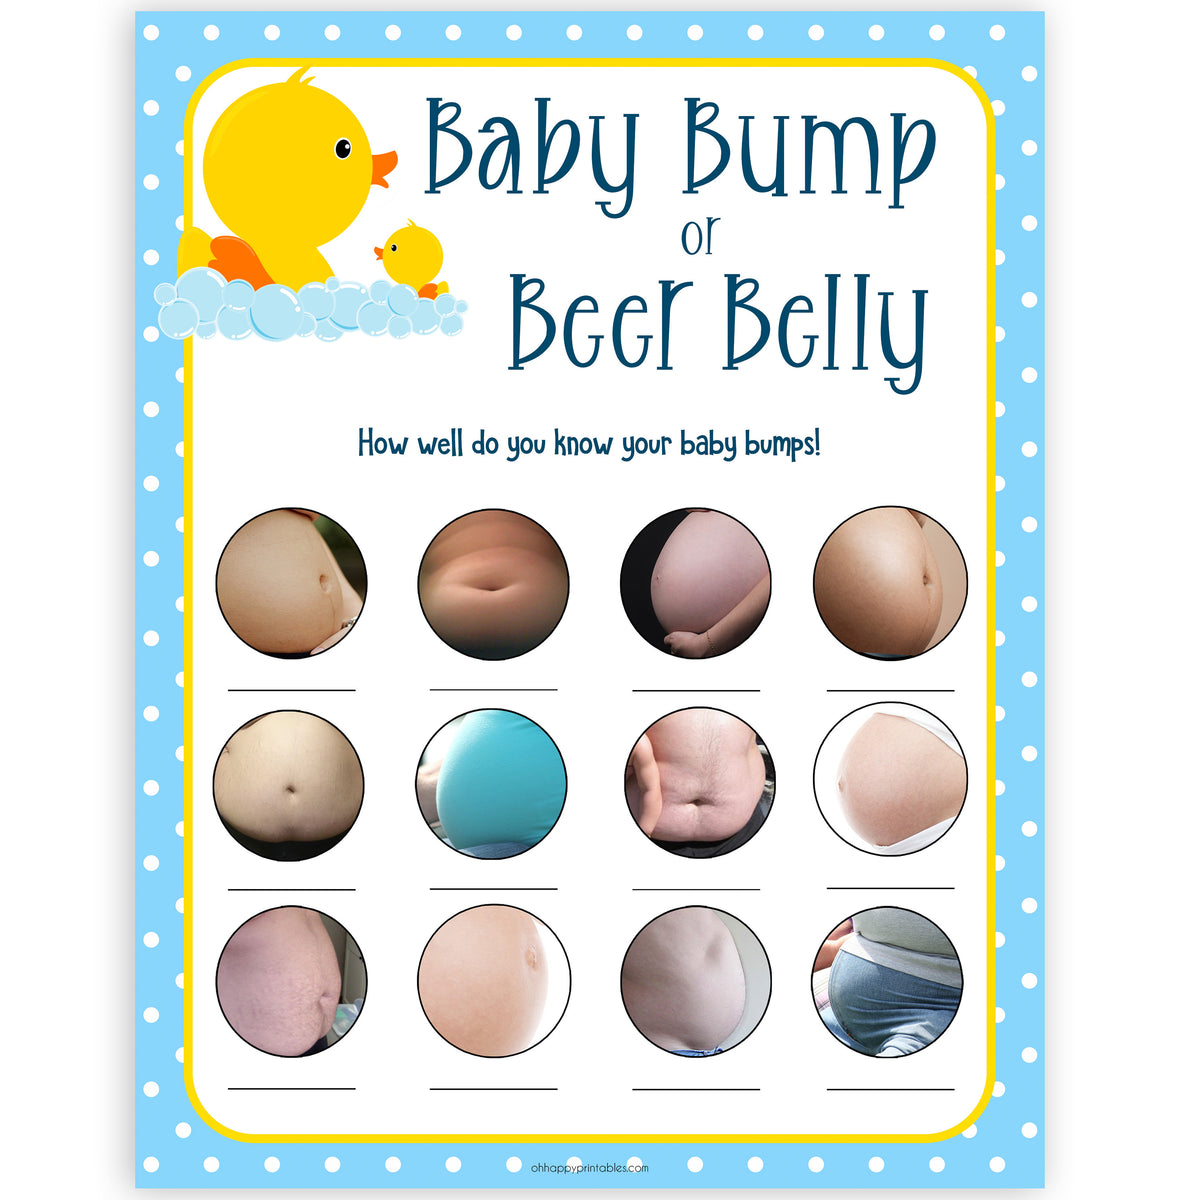 rubber ducky baby games, baby bump or beer belly baby game, printable baby games, baby shower games, rubber ducky baby theme, fun baby games, popular baby games